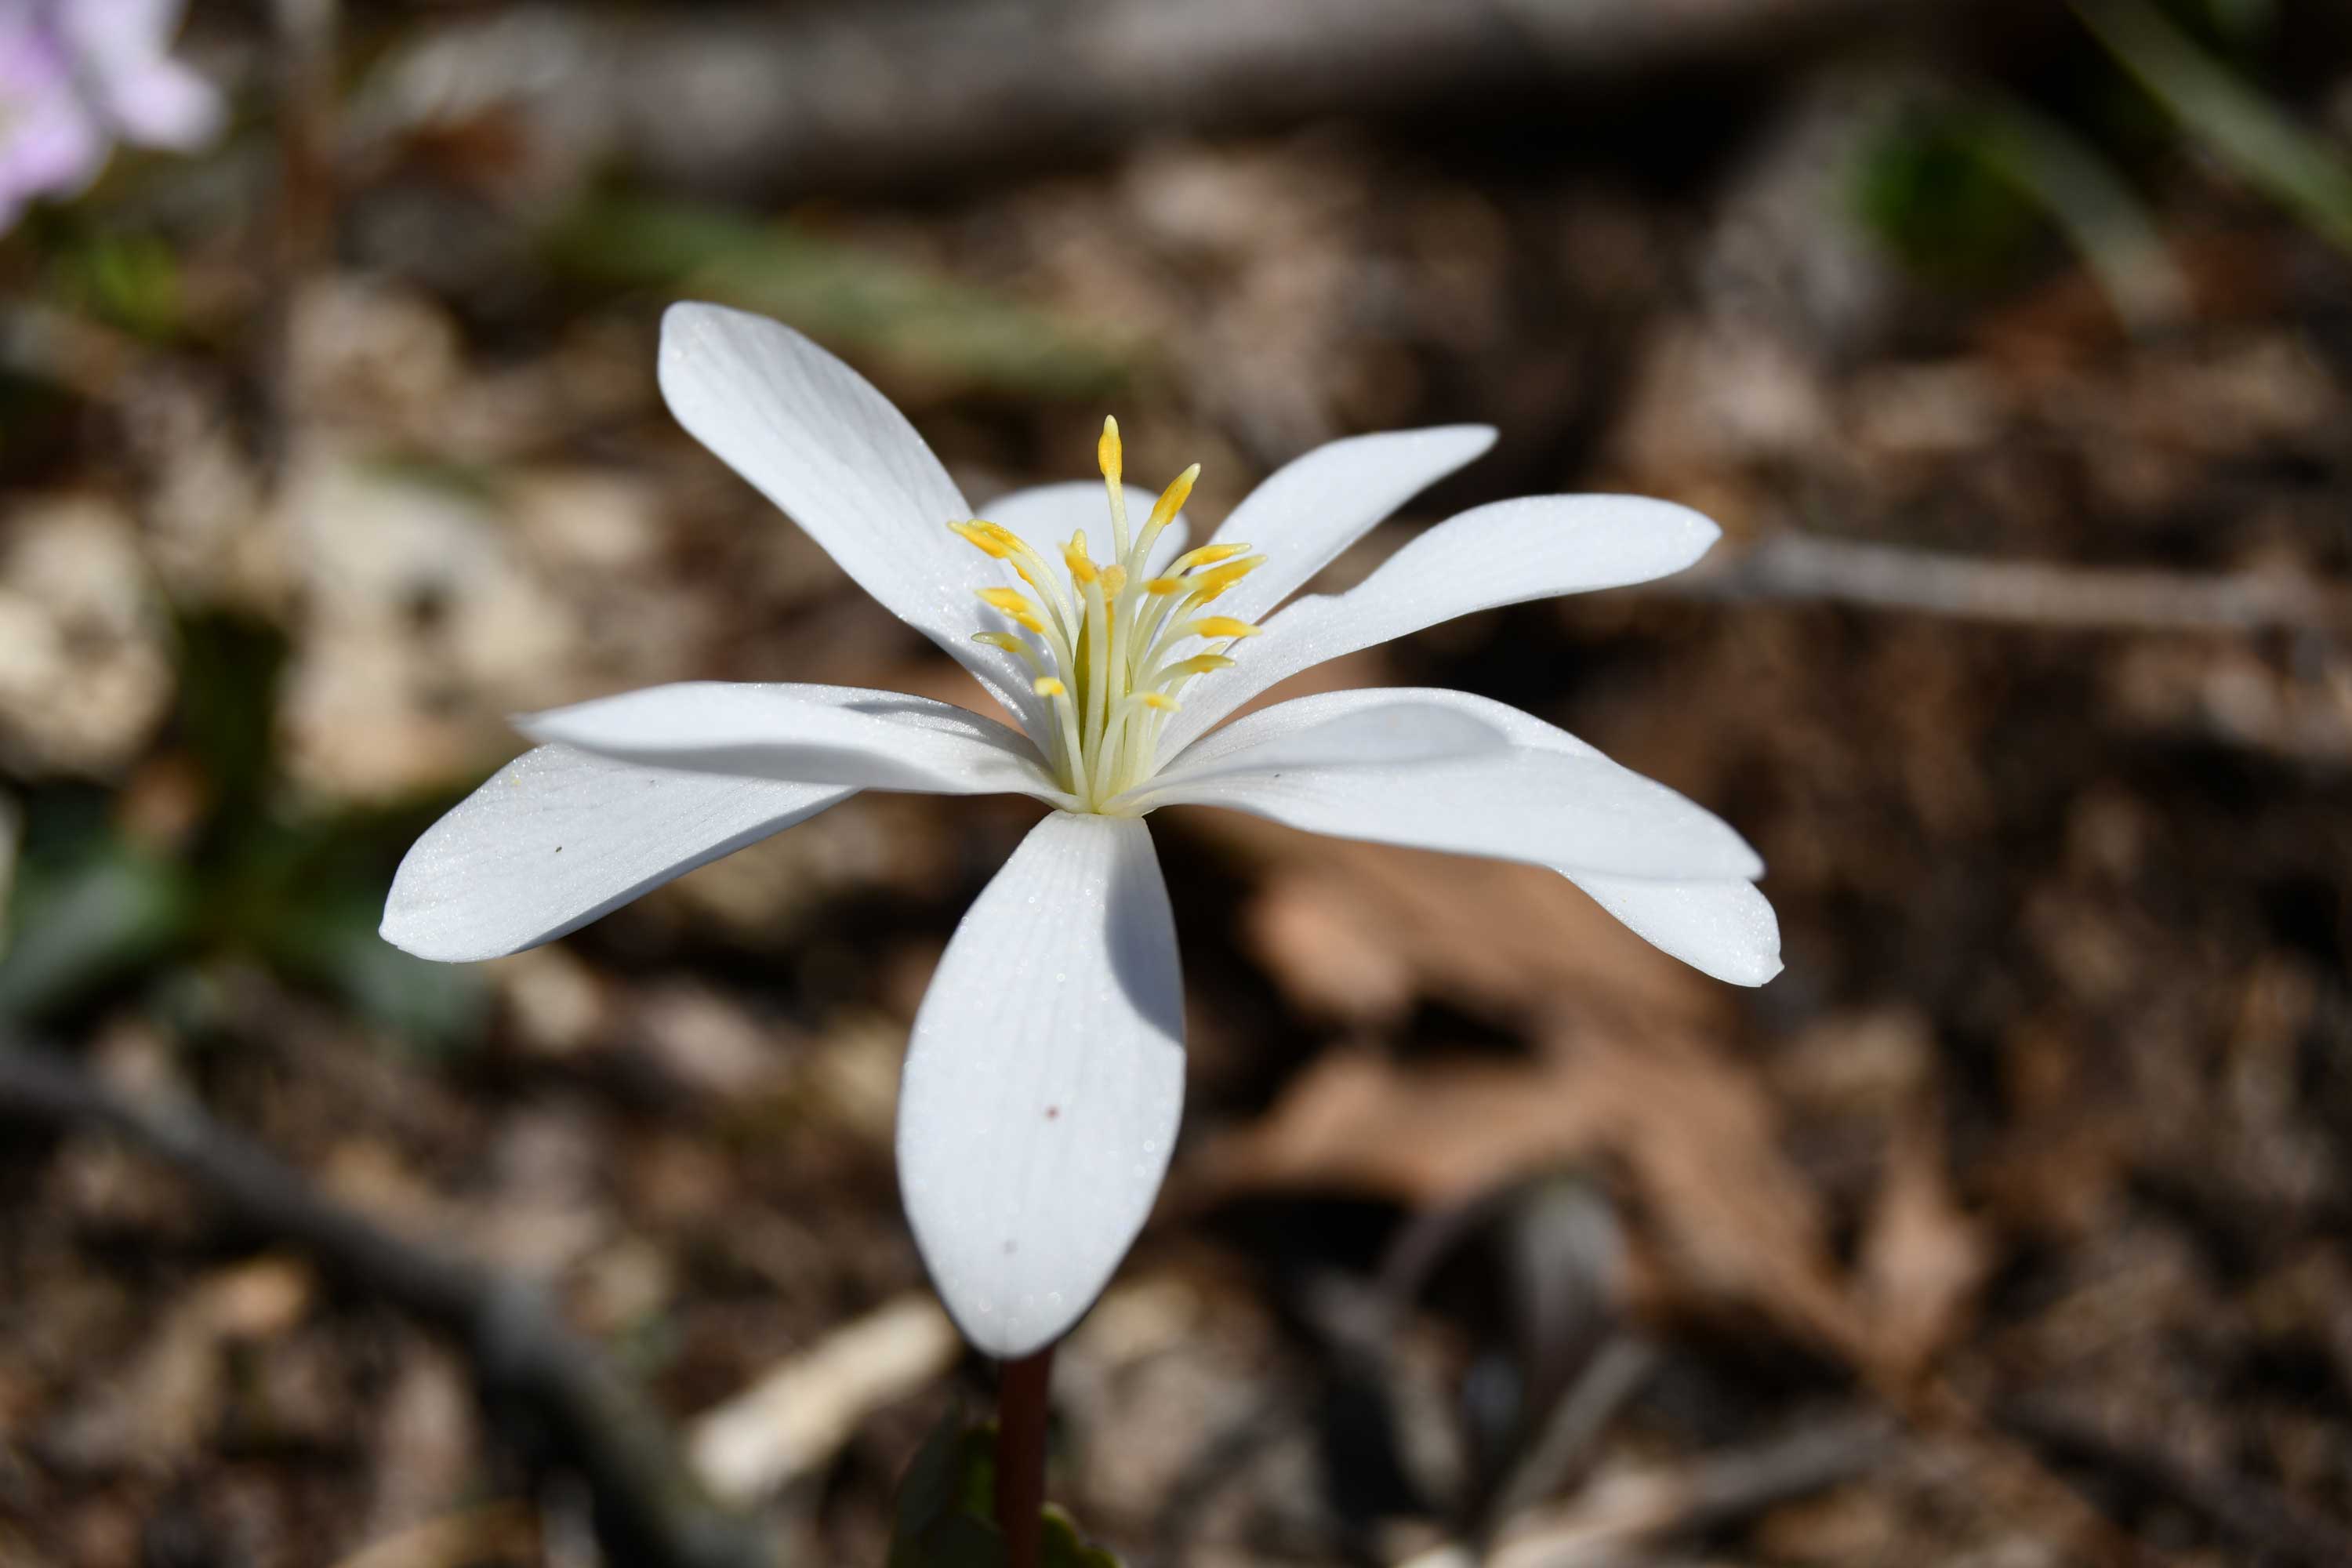 The white petals of bloodroot